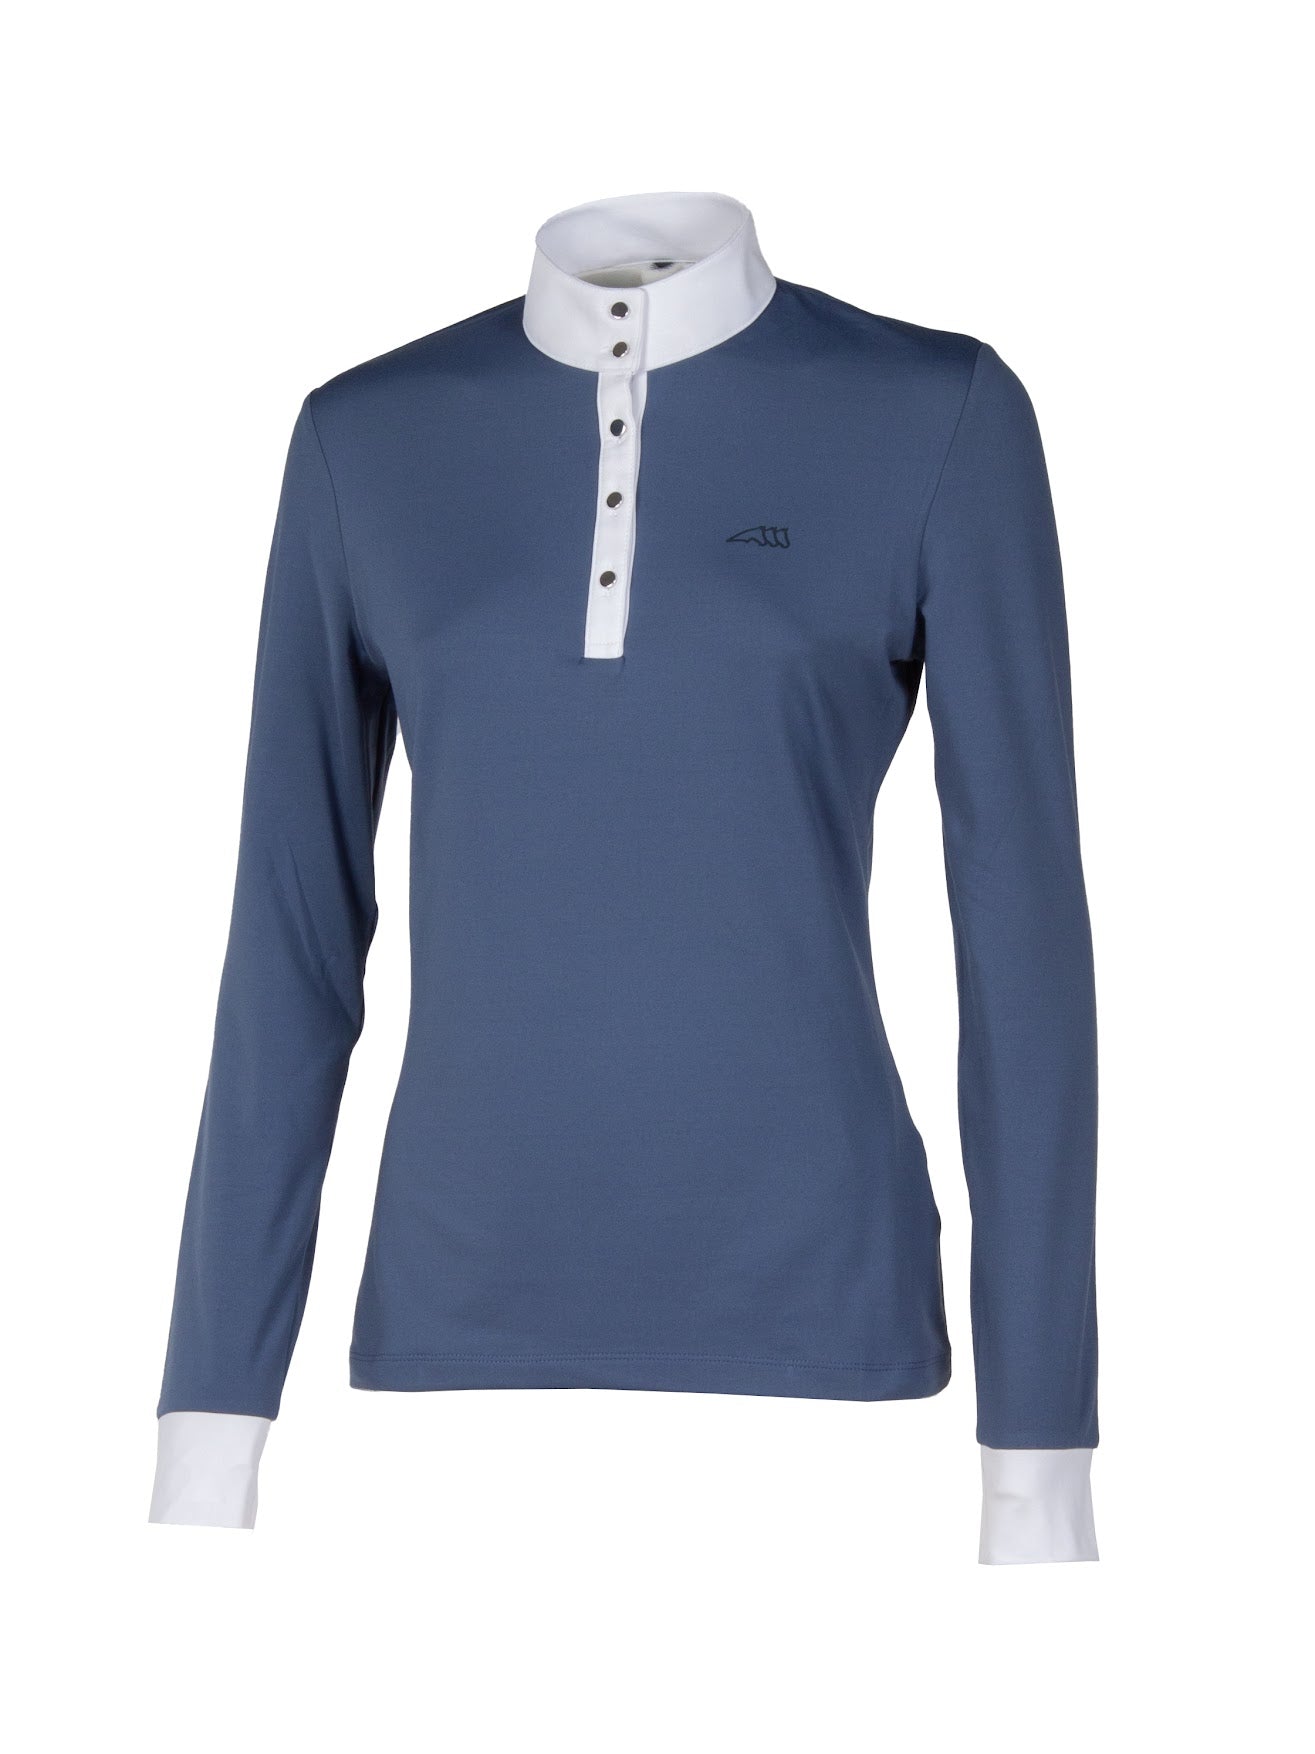 Add a touch of colour to your competition wardrobe with the Equiline competition shirt Emark.  The highly breathable, quick dry material is warm and soft on the inside. With white cuffs and collar and finished with silver buttons up the front. Finished with the Equiline logo on the front.  Available in Camel or Tempest Blue.